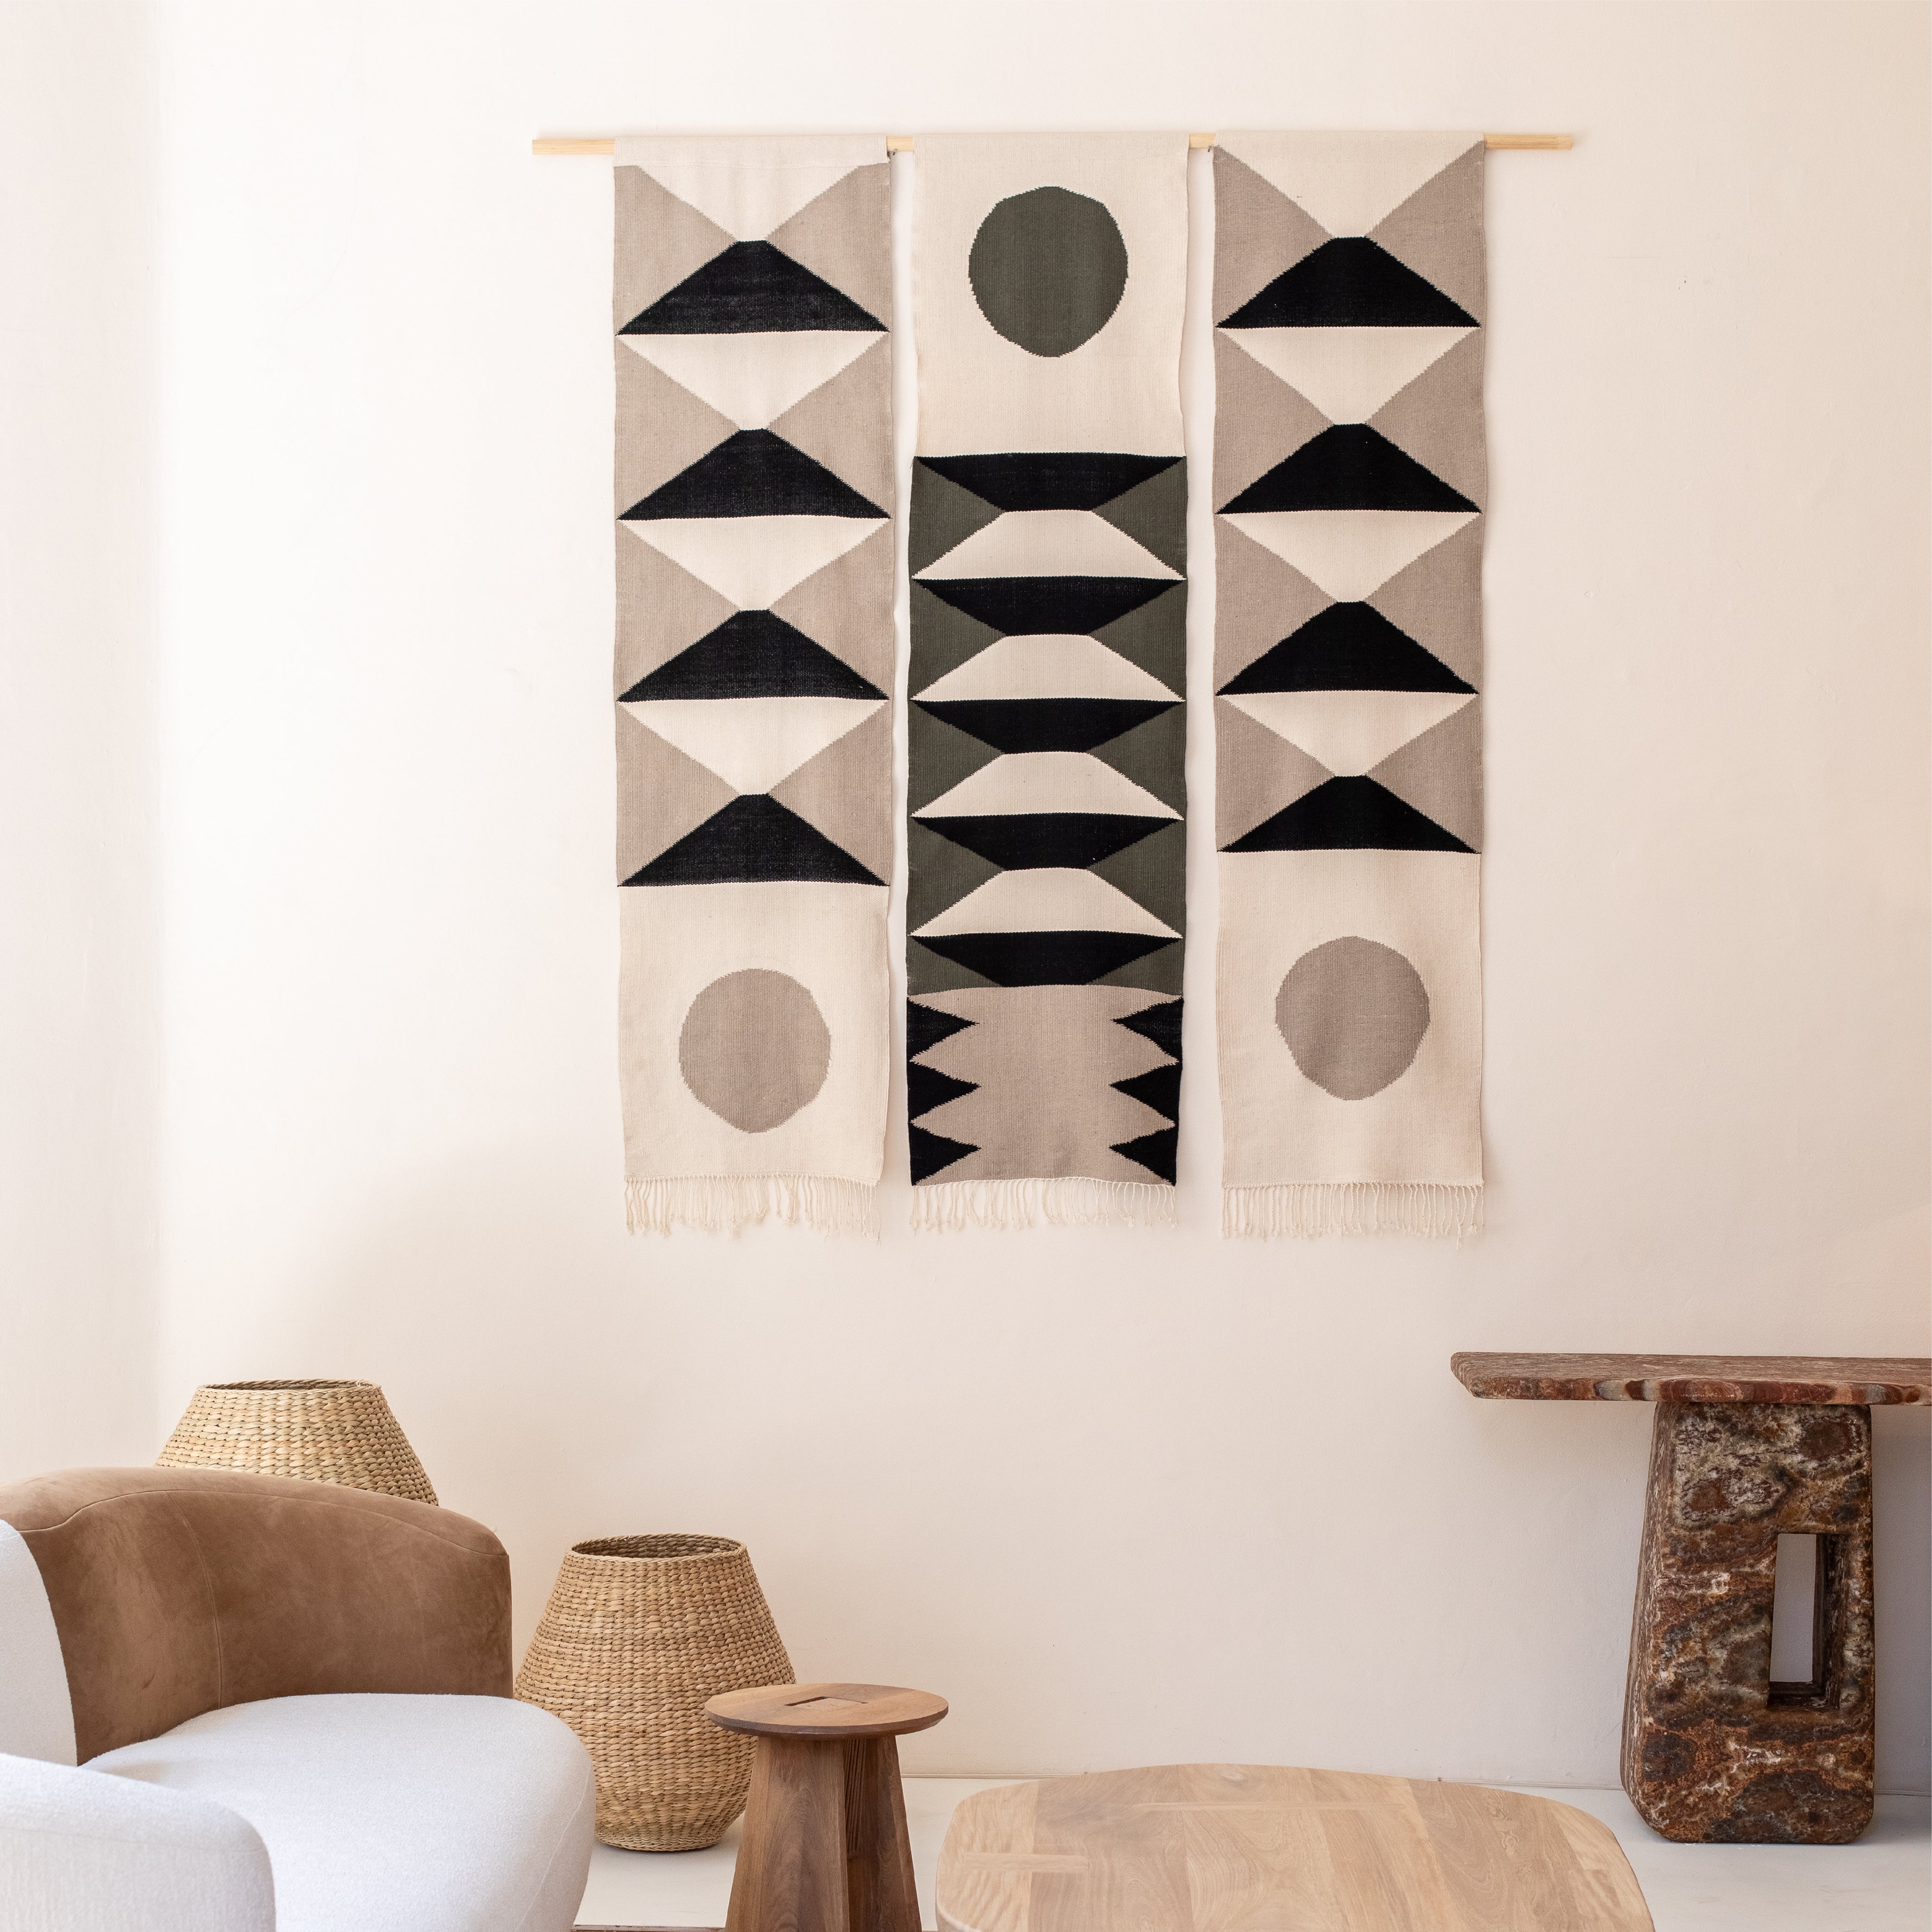 “OPPOSITES” wallhanging diptych and triptych